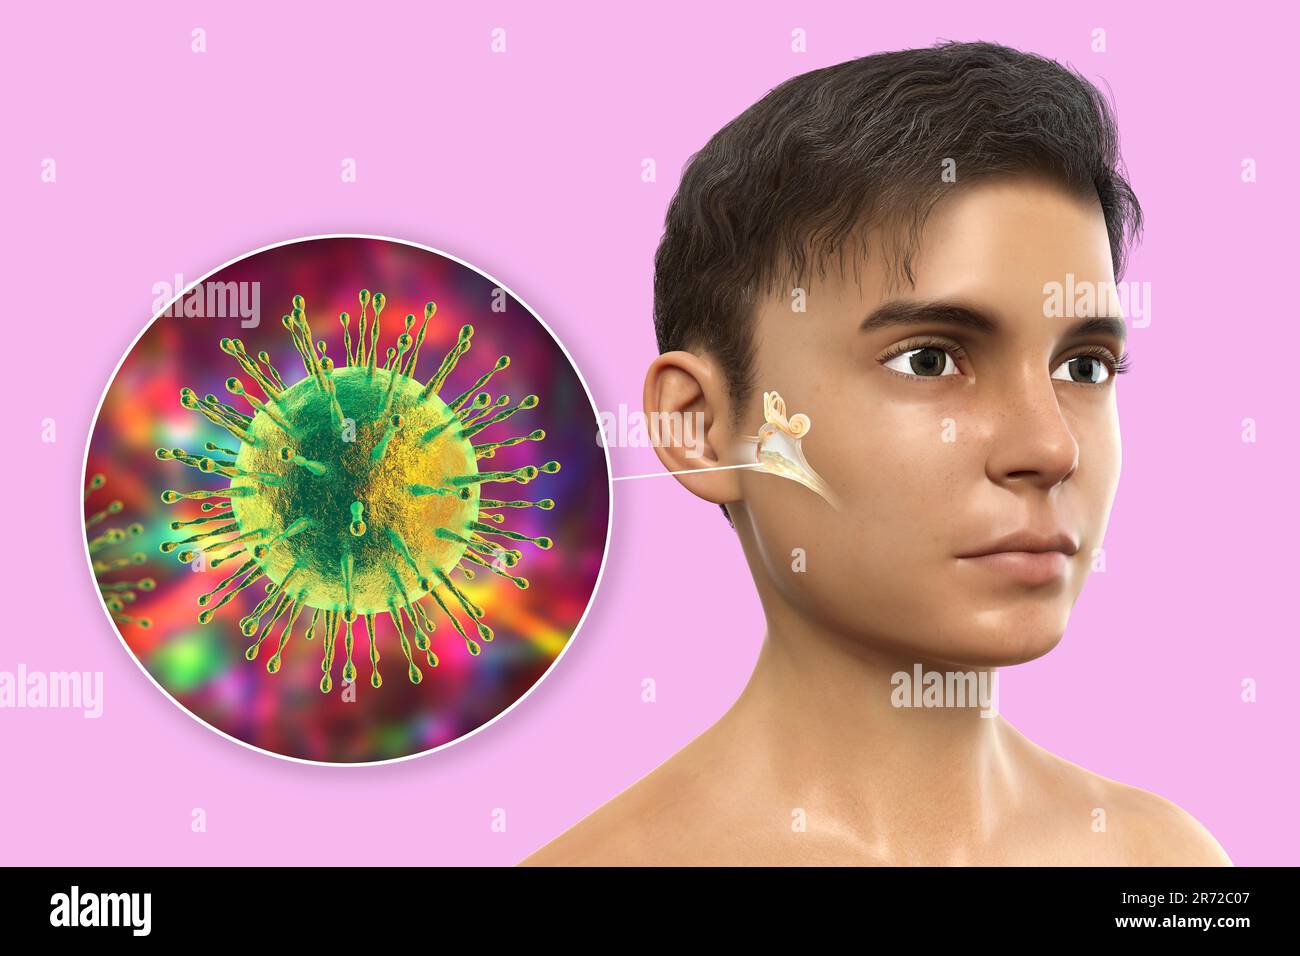 Viral otitis media, a group of inflammatory diseases of the middle ear. Computer illustration showing a boy with highlighted structures of inflamed mi Stock Photo